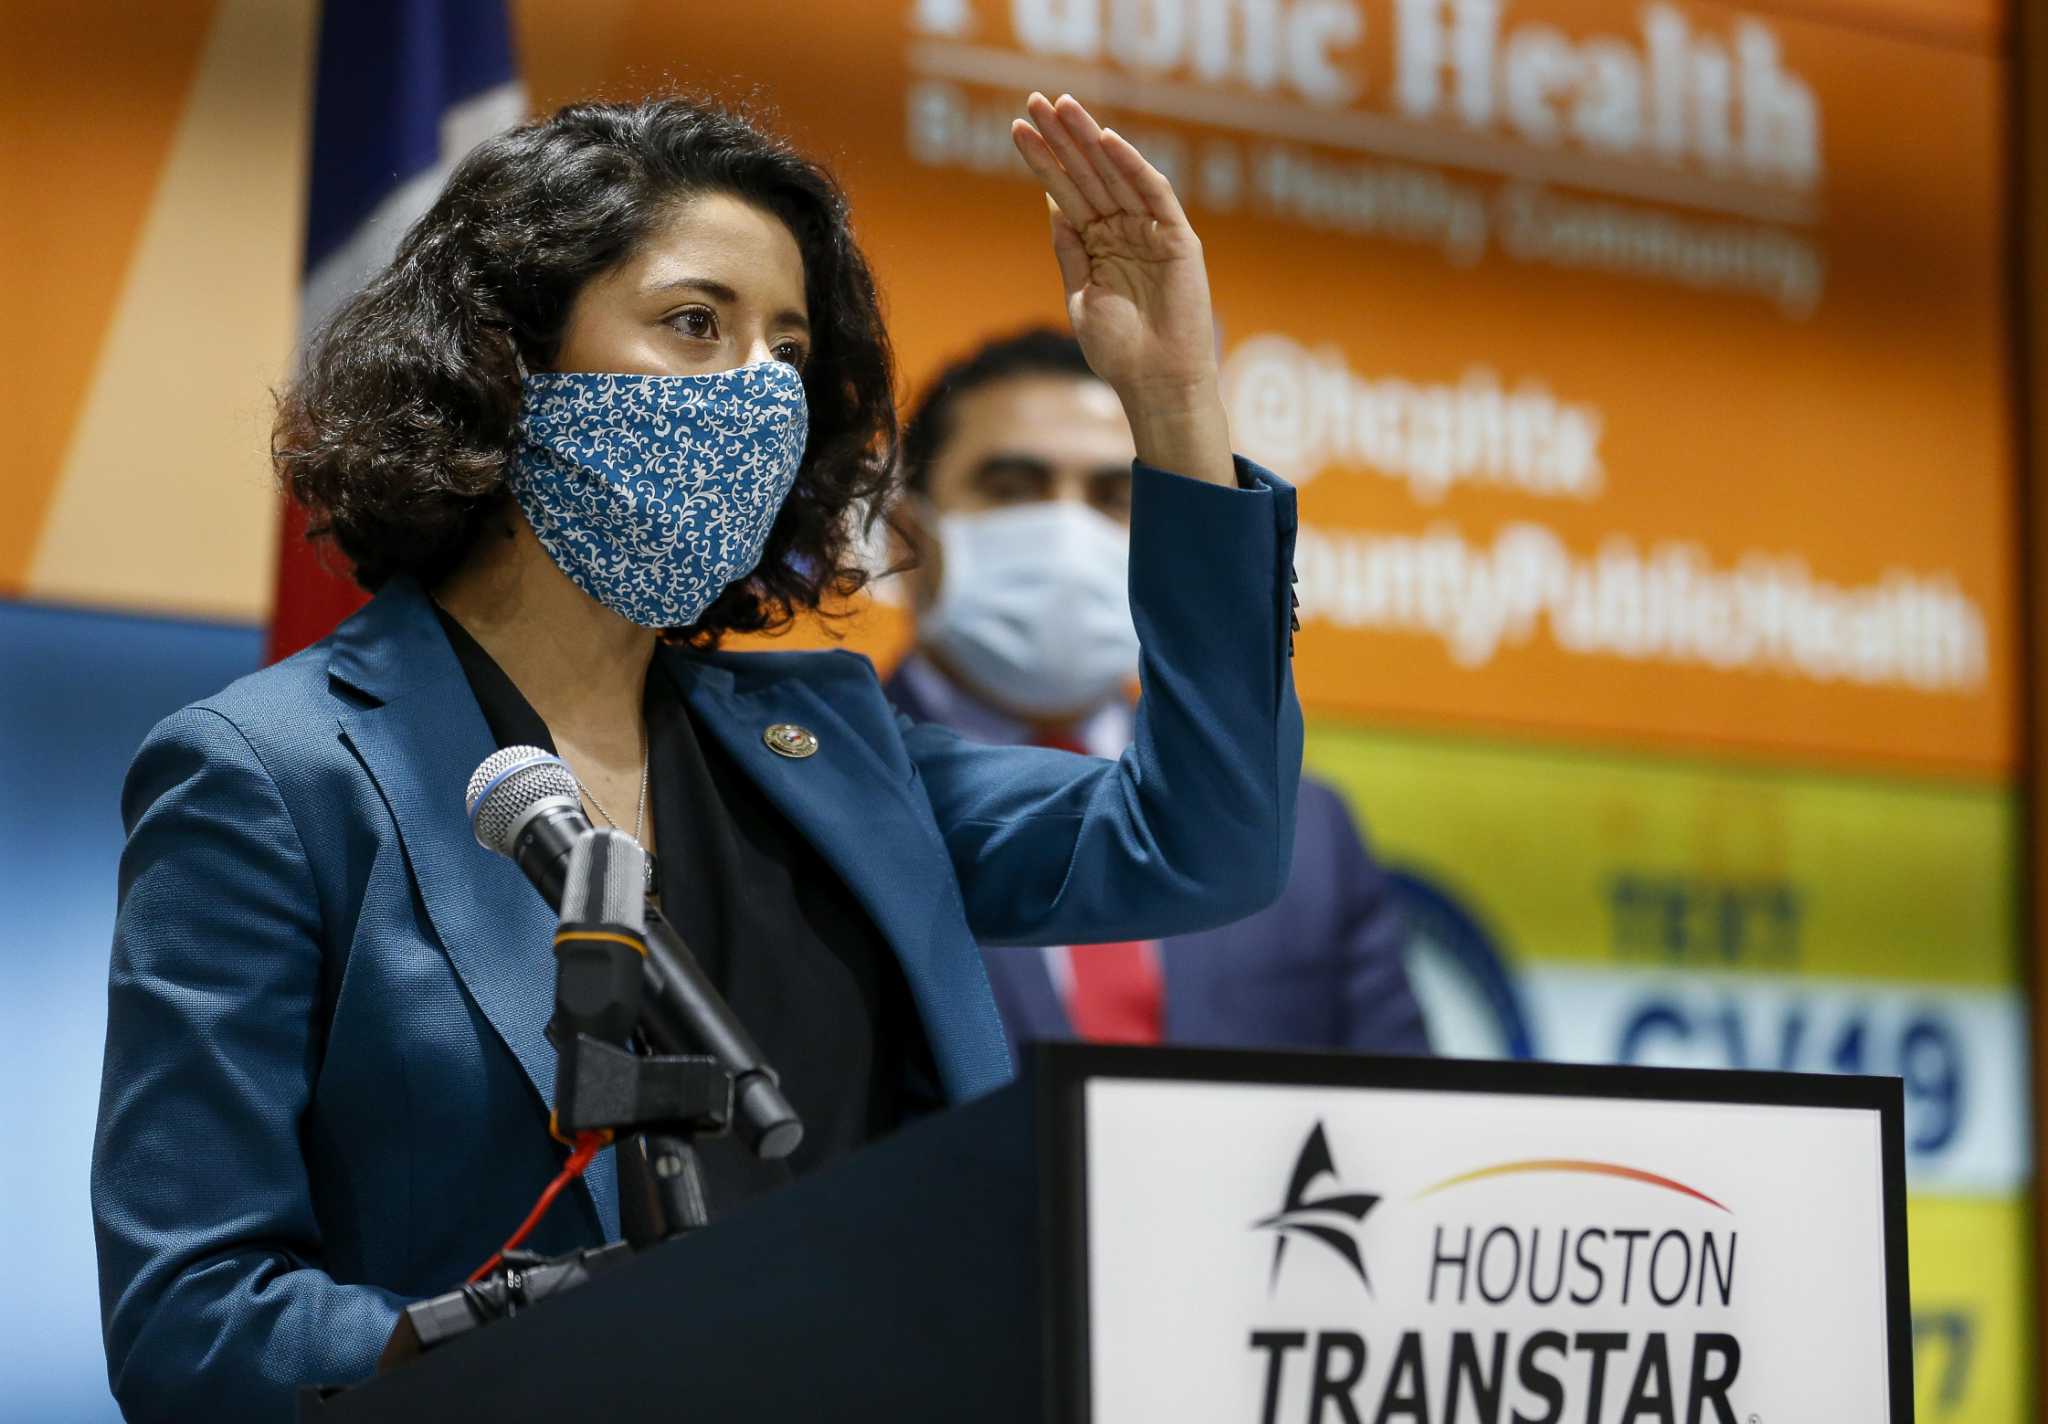 Hidalgo orders Harris County businesses require customers wear masks as hospitalizations rise - HoustonChronicle.com